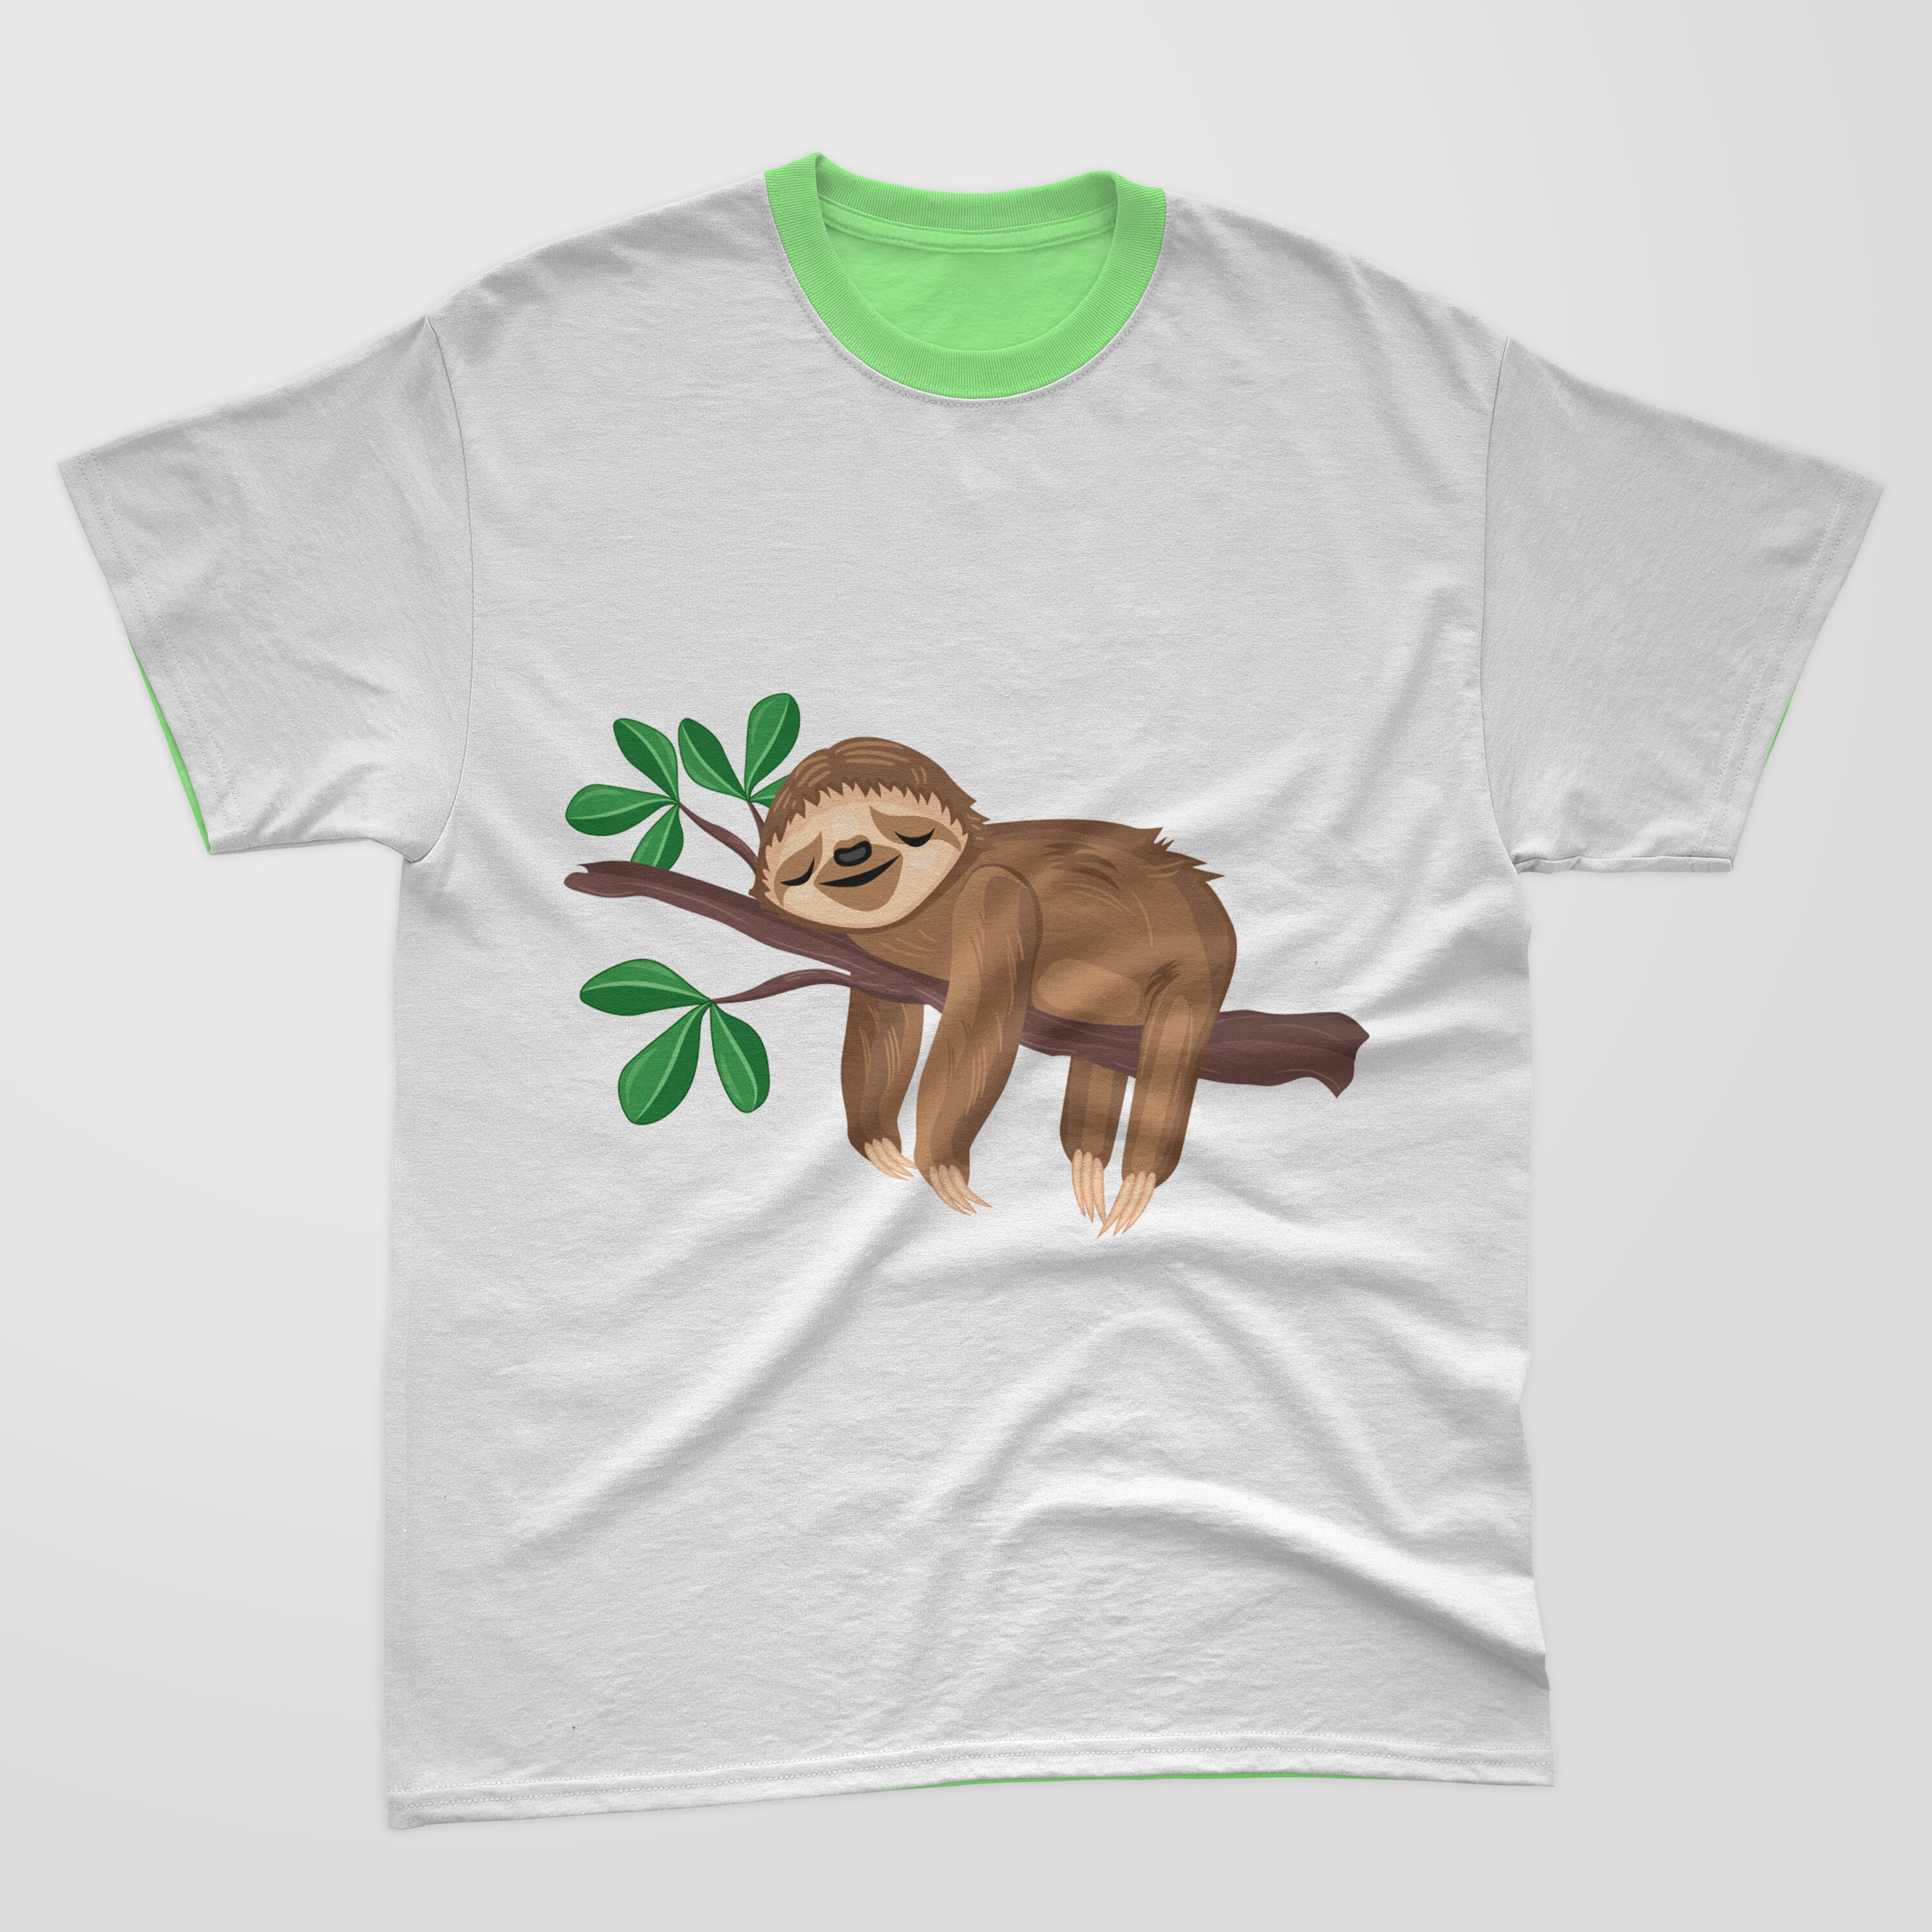 Image of a t-shirt with a colorful sloth print.